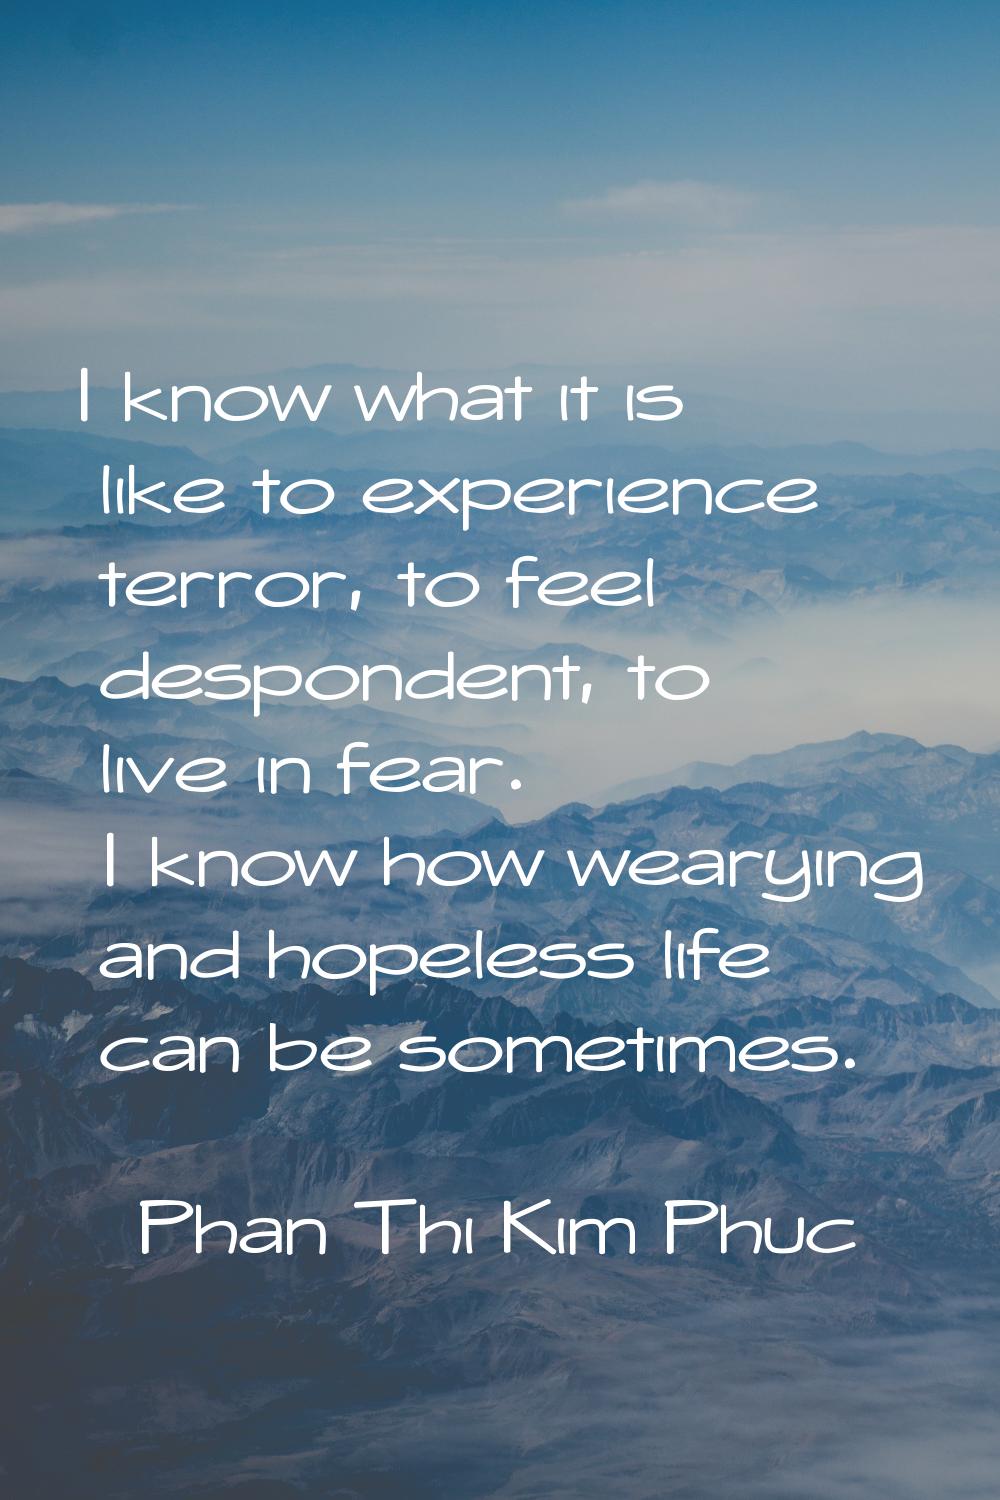 I know what it is like to experience terror, to feel despondent, to live in fear. I know how wearyi